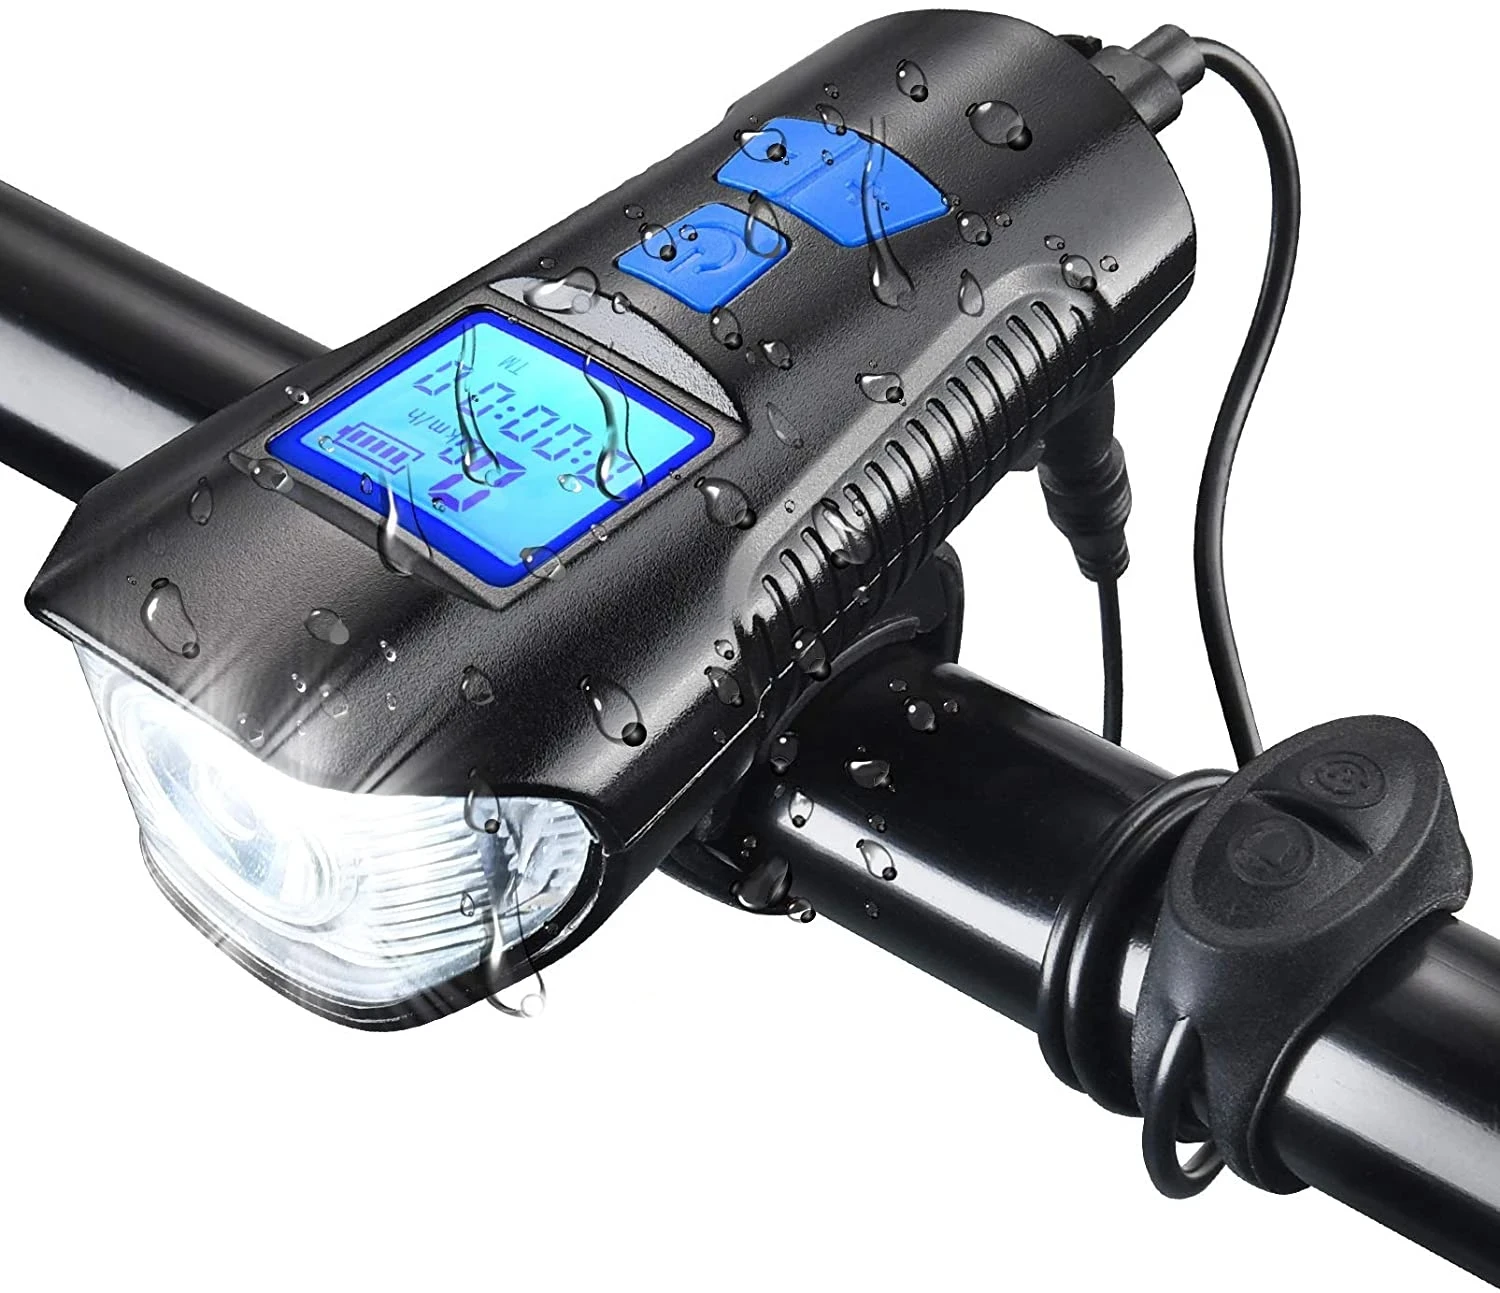 

Waterproof Bicycle Light USB Rechargeable Bike Front Light Flashlight with Bike Computer LCD Speedometer Cycling Head Light Horn